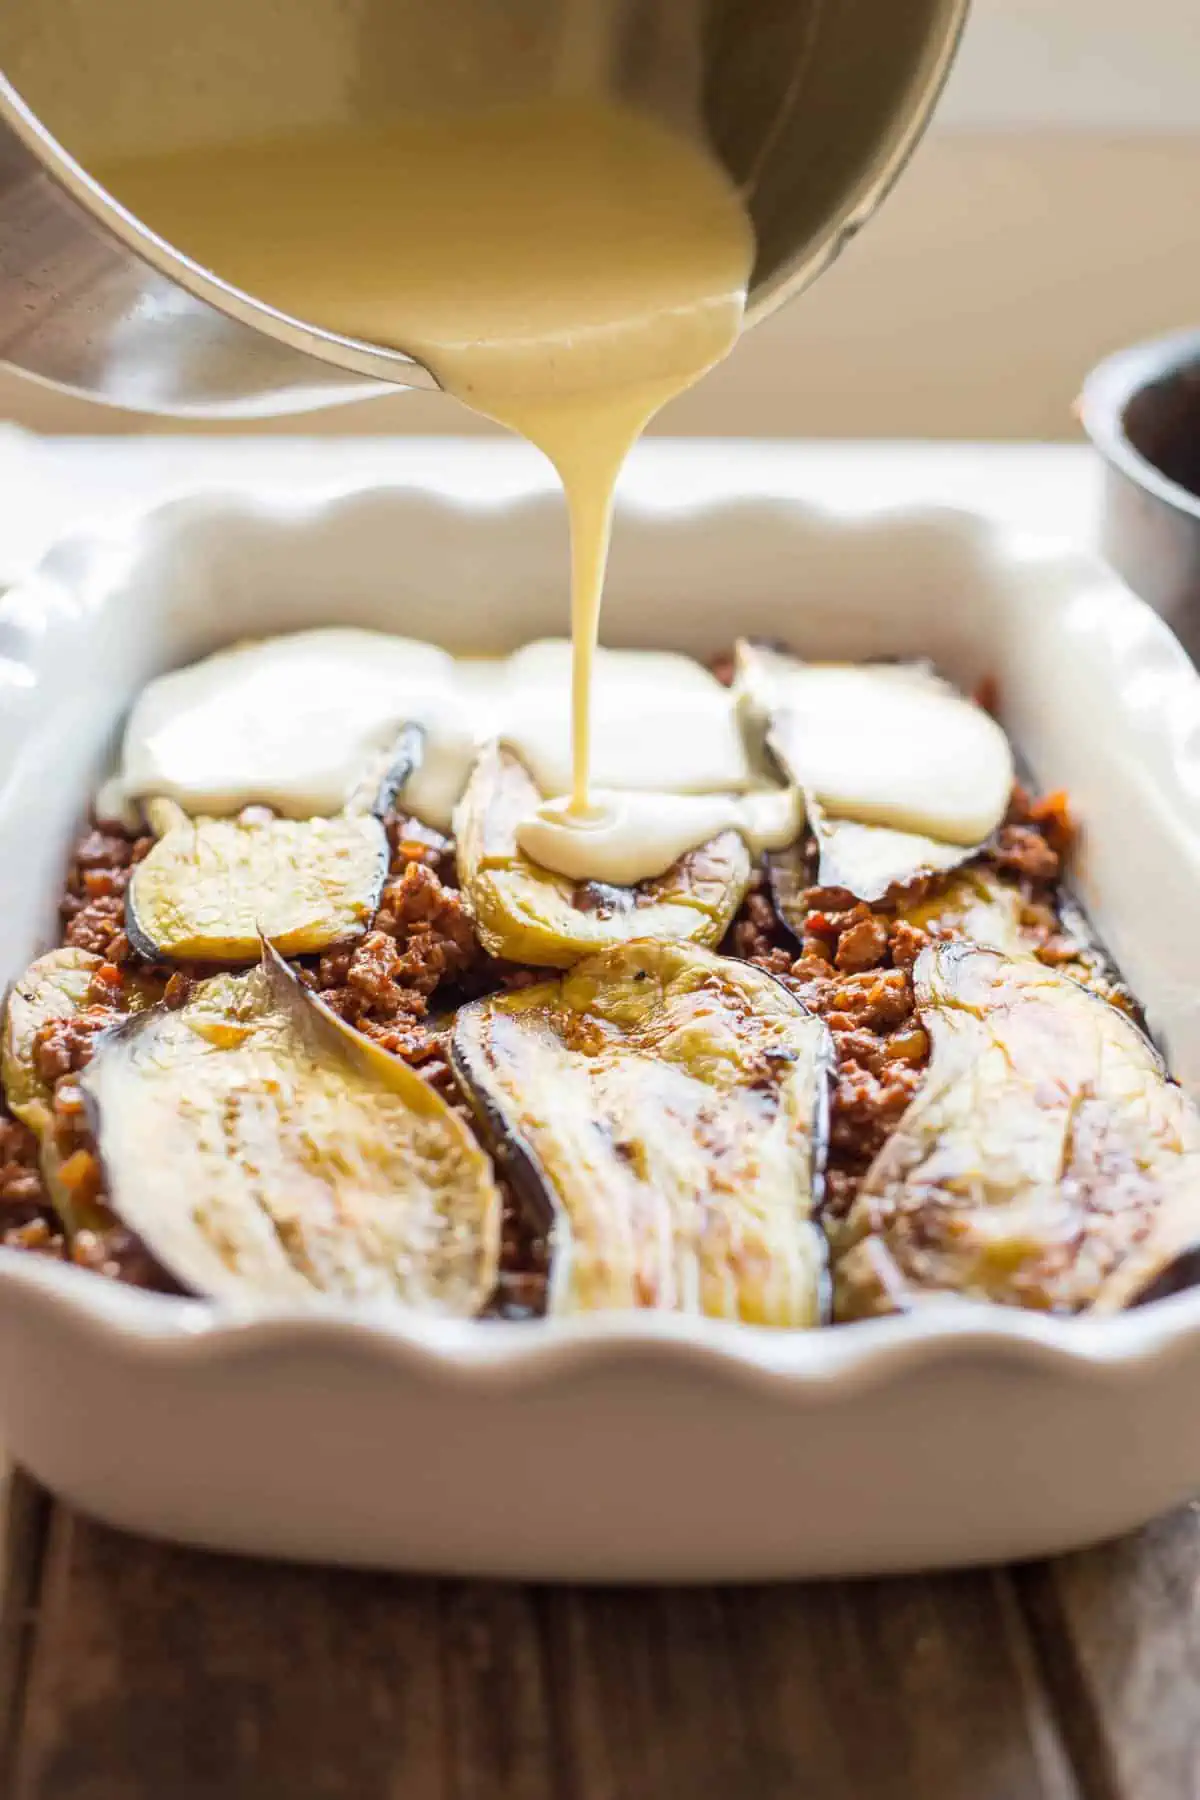 A silver pot pouring sauce overtop of layered eggplant and ground turkey in a baking dish.